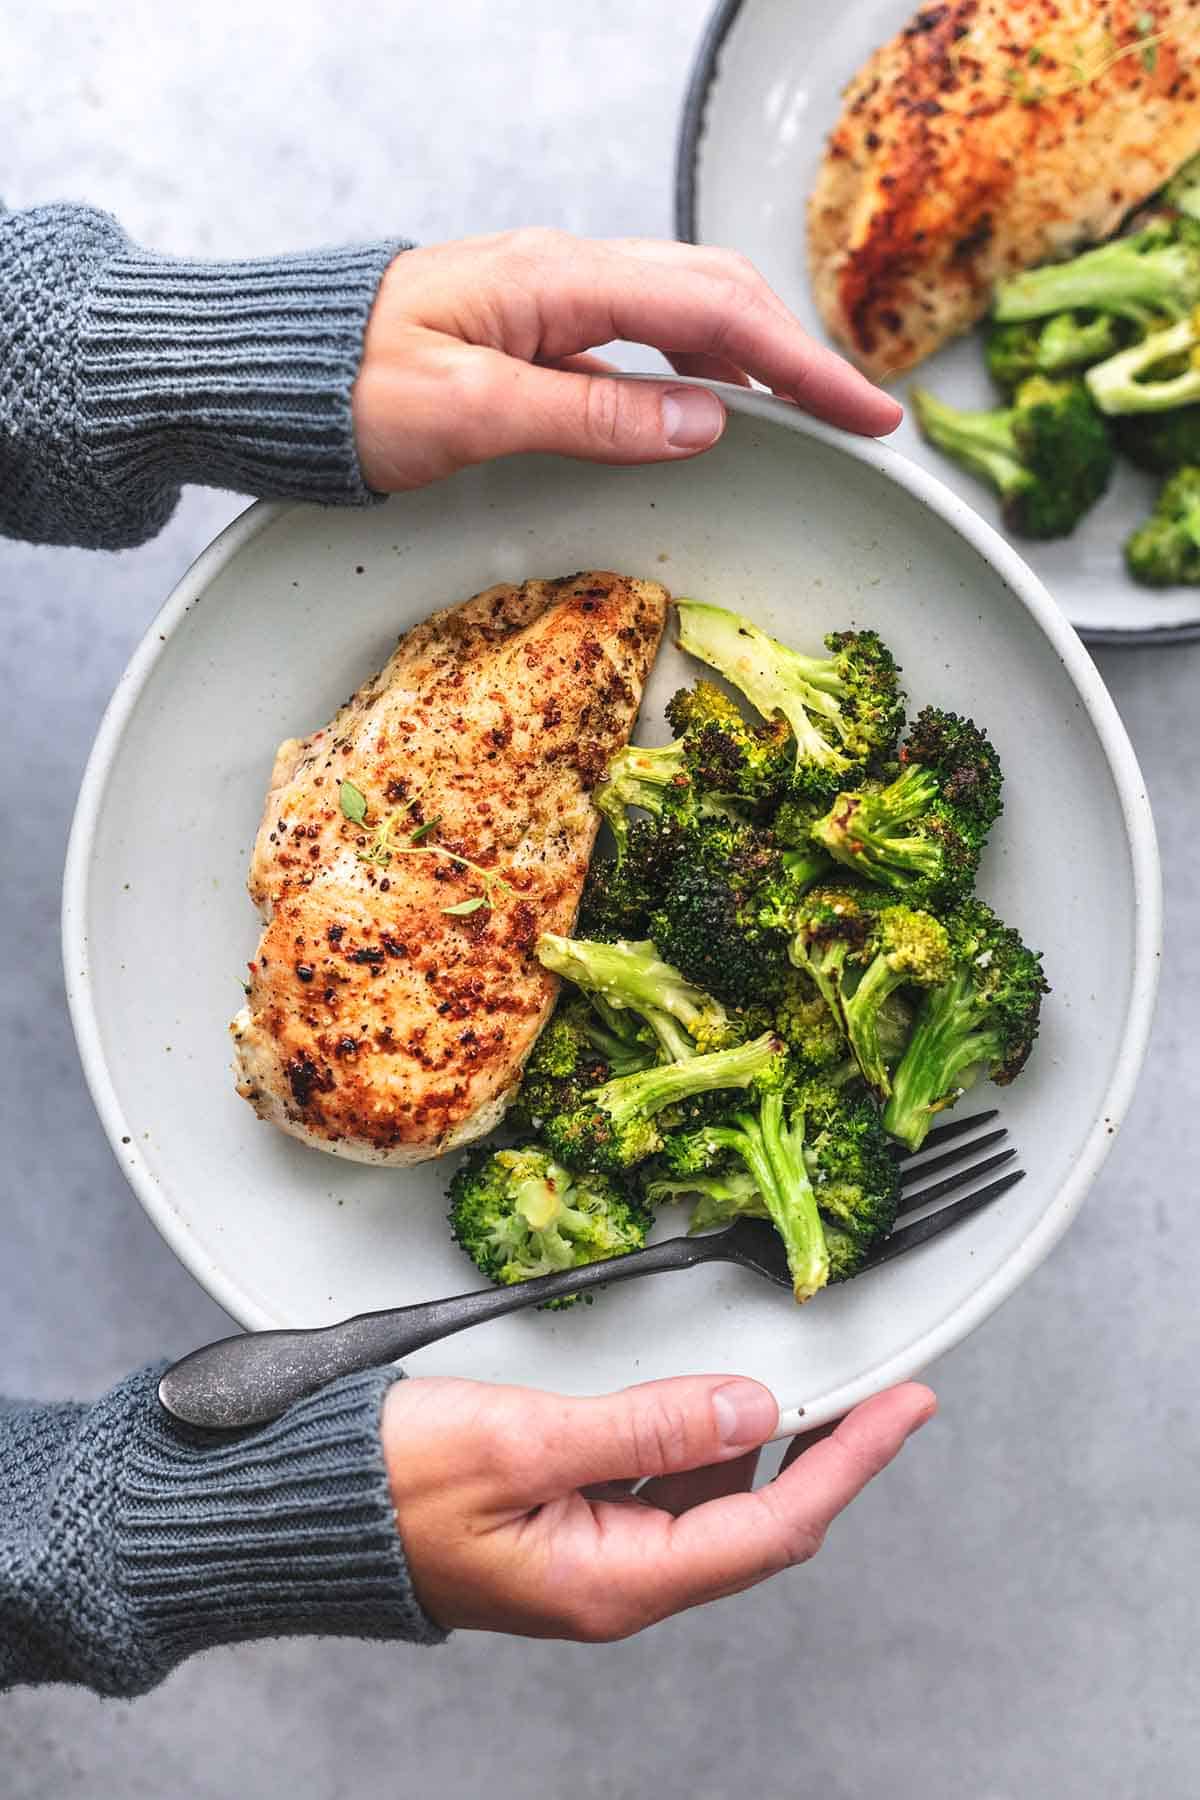 top view of hands holding a plate of chicken and broccoli skillet.